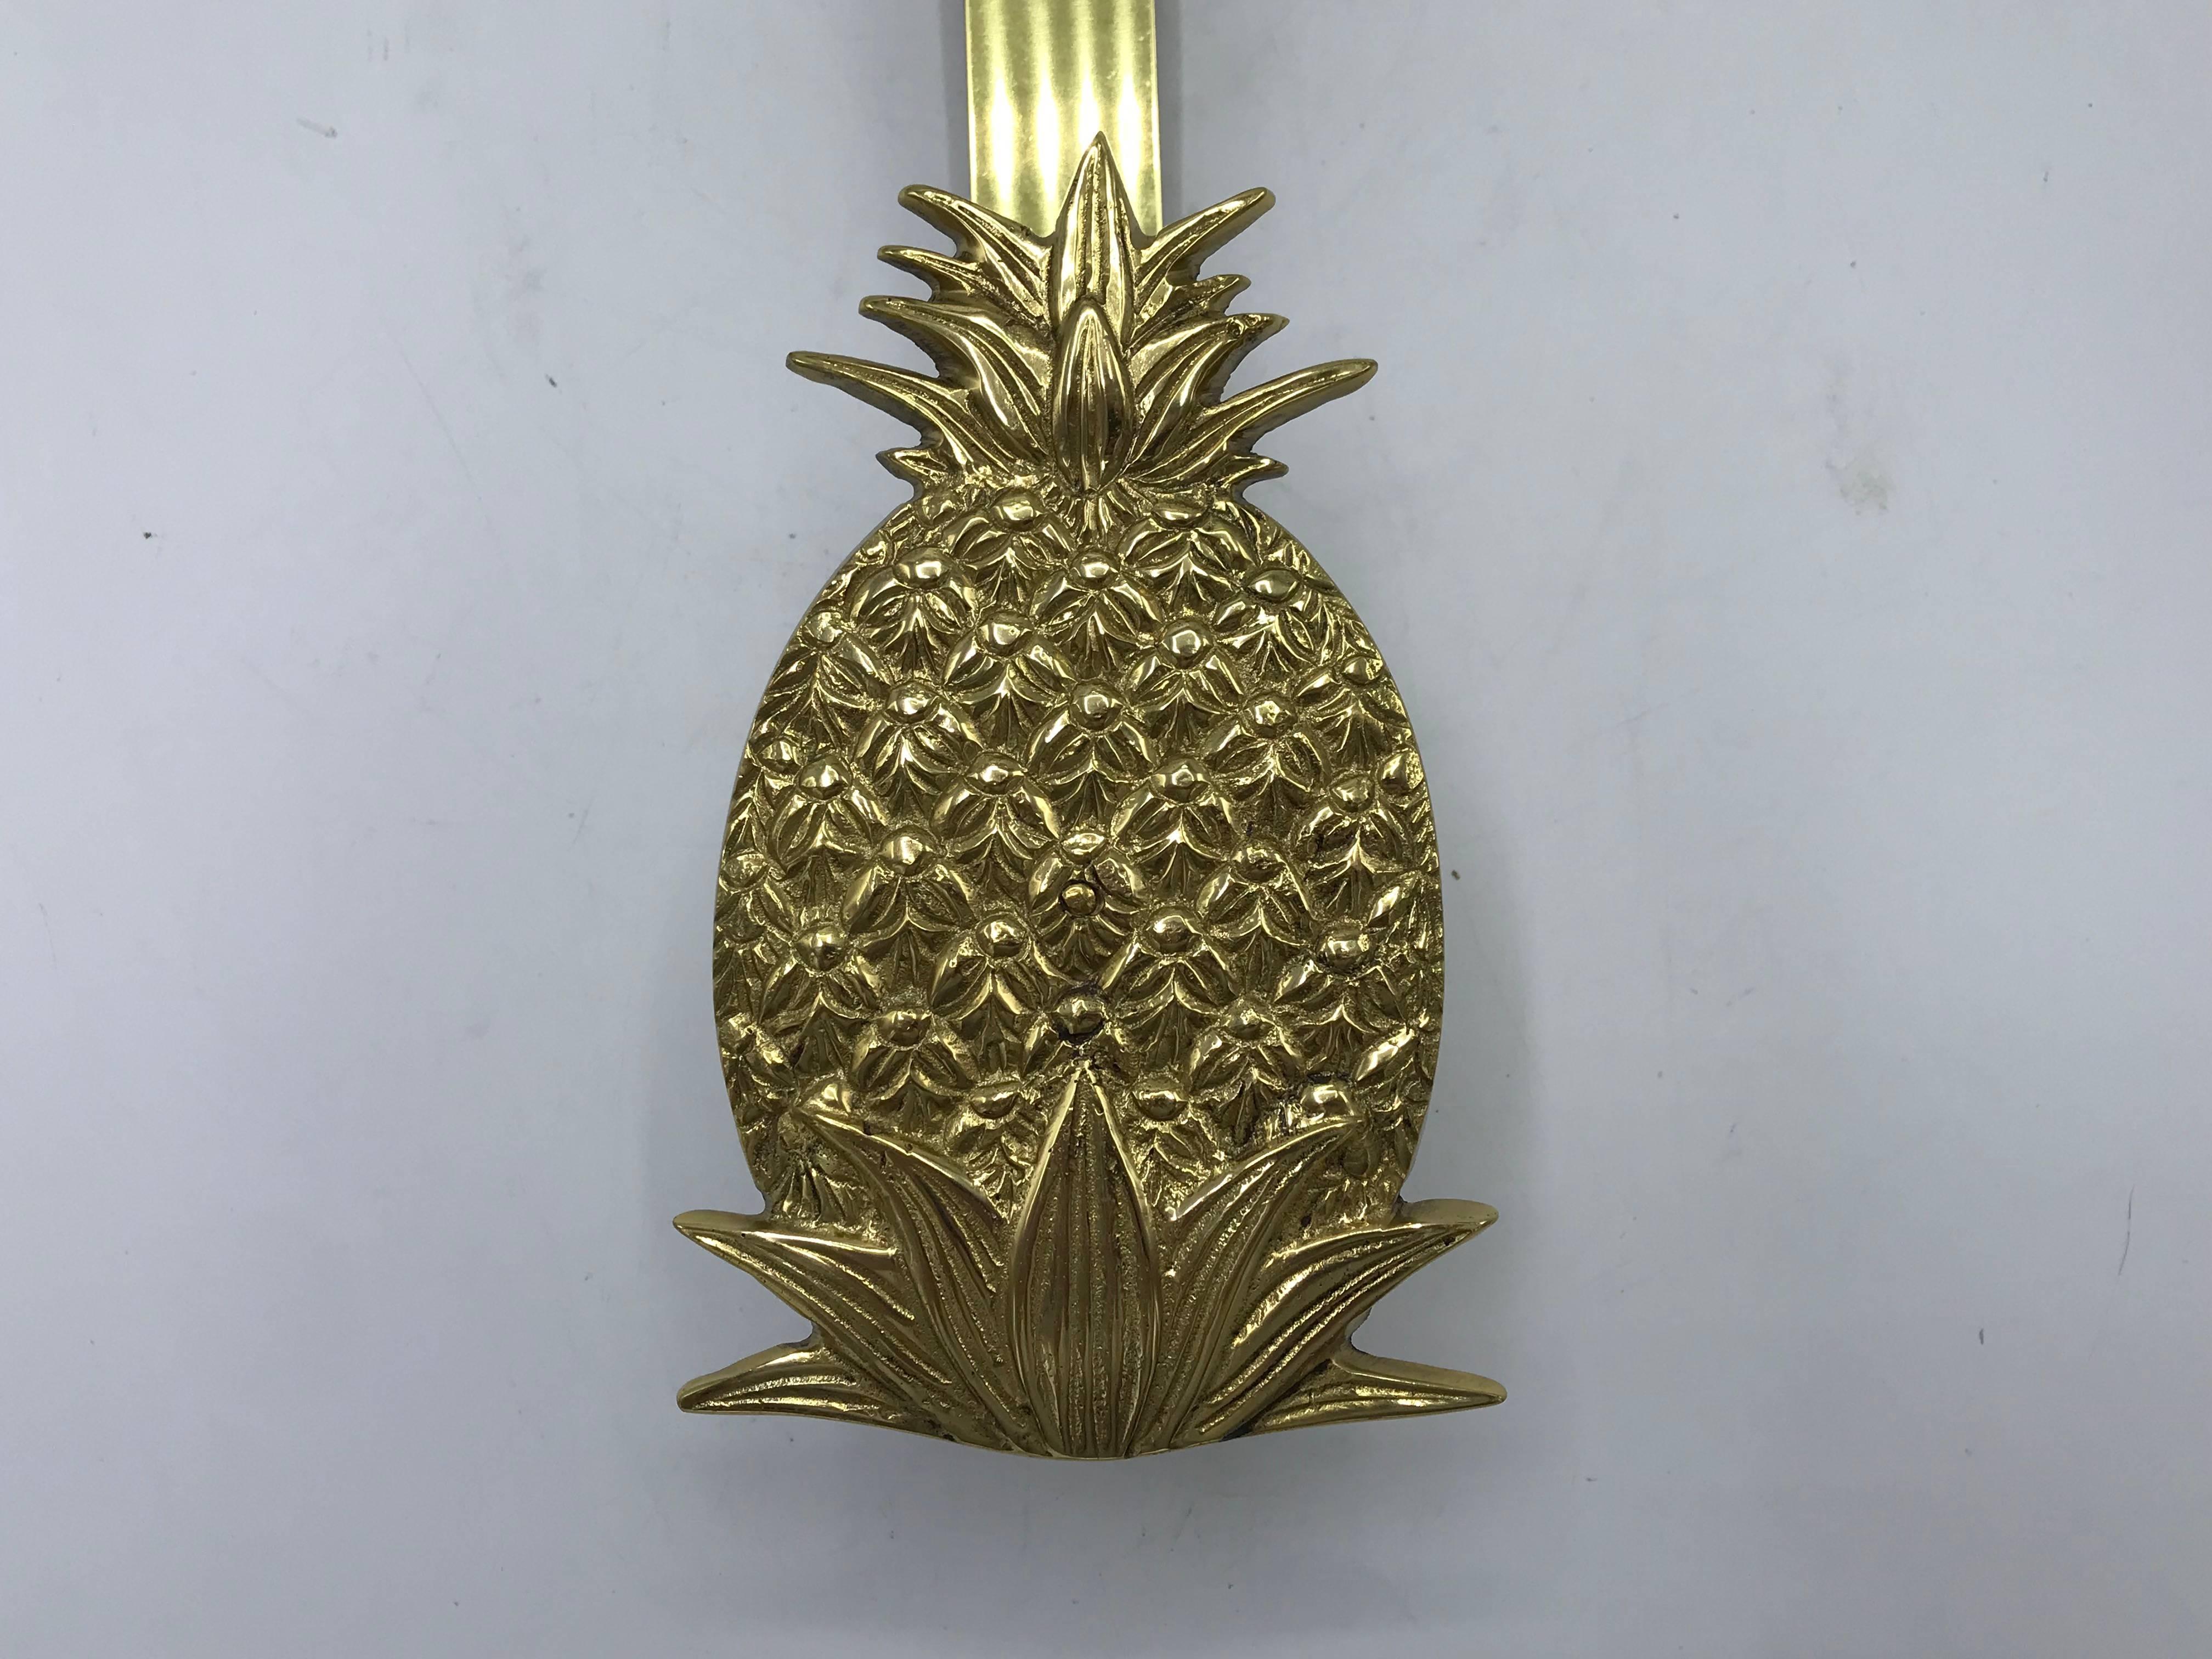 Offered is a beautiful and welcoming, 1970s solid-brass over-the-door wreath hanger. The stunning and heavily detailed pineapple motif is fabulous, measuring 6.75in tall and 4.25in wide. Heavy.